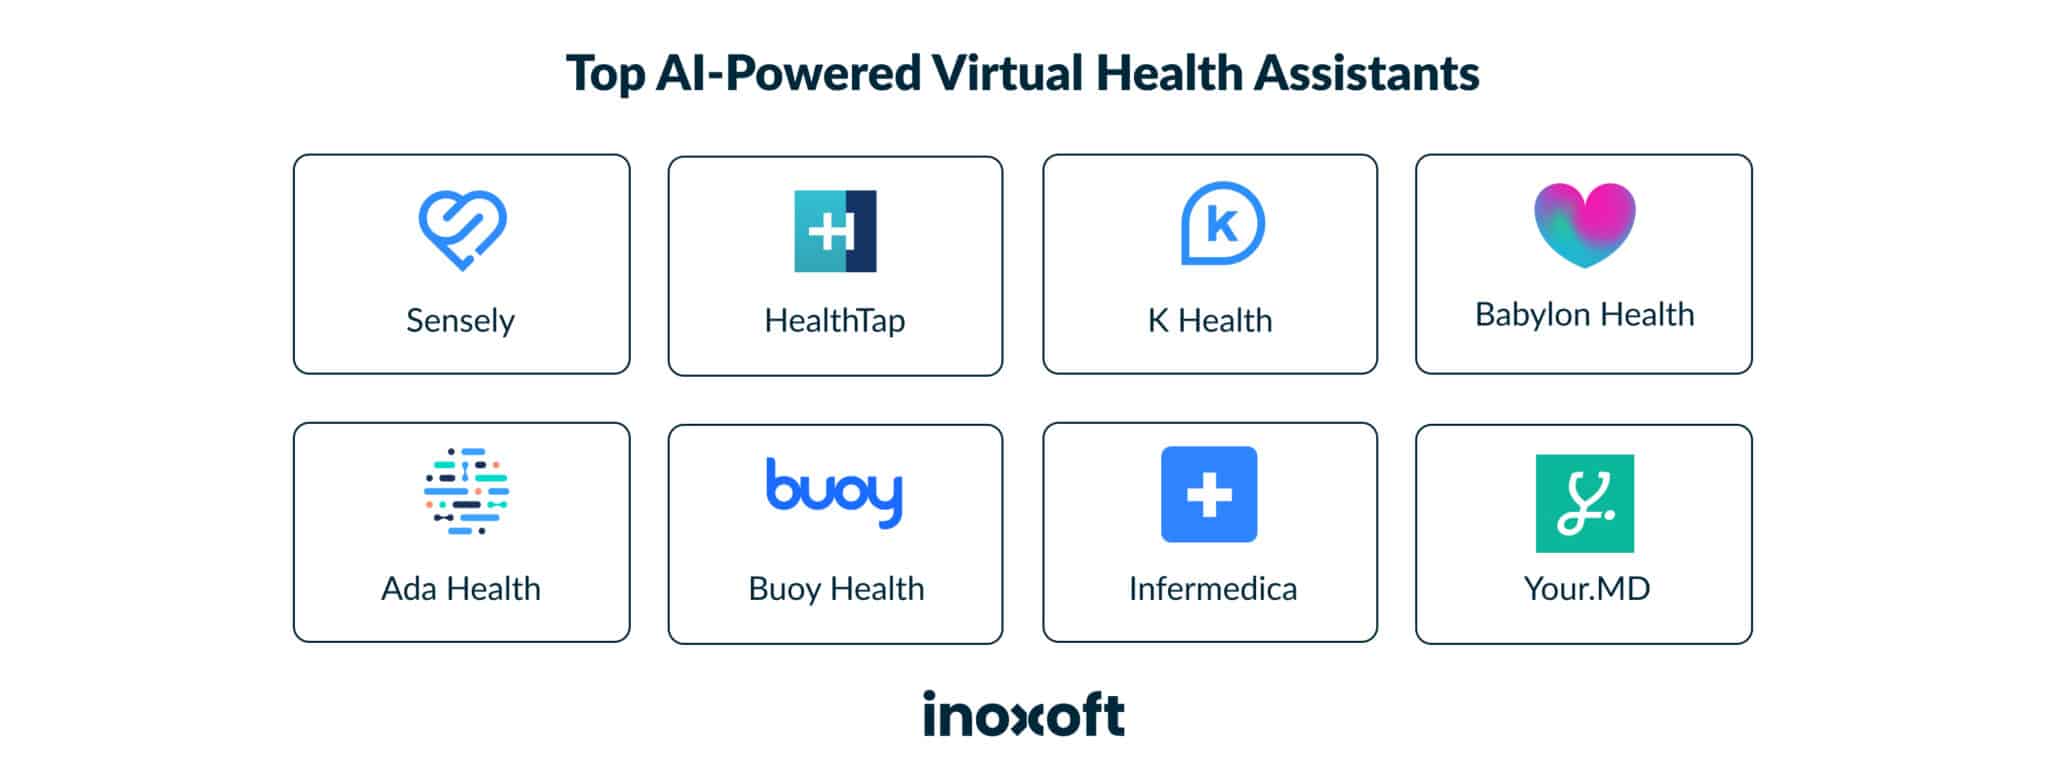 How to Build a Virtual Health Assistant